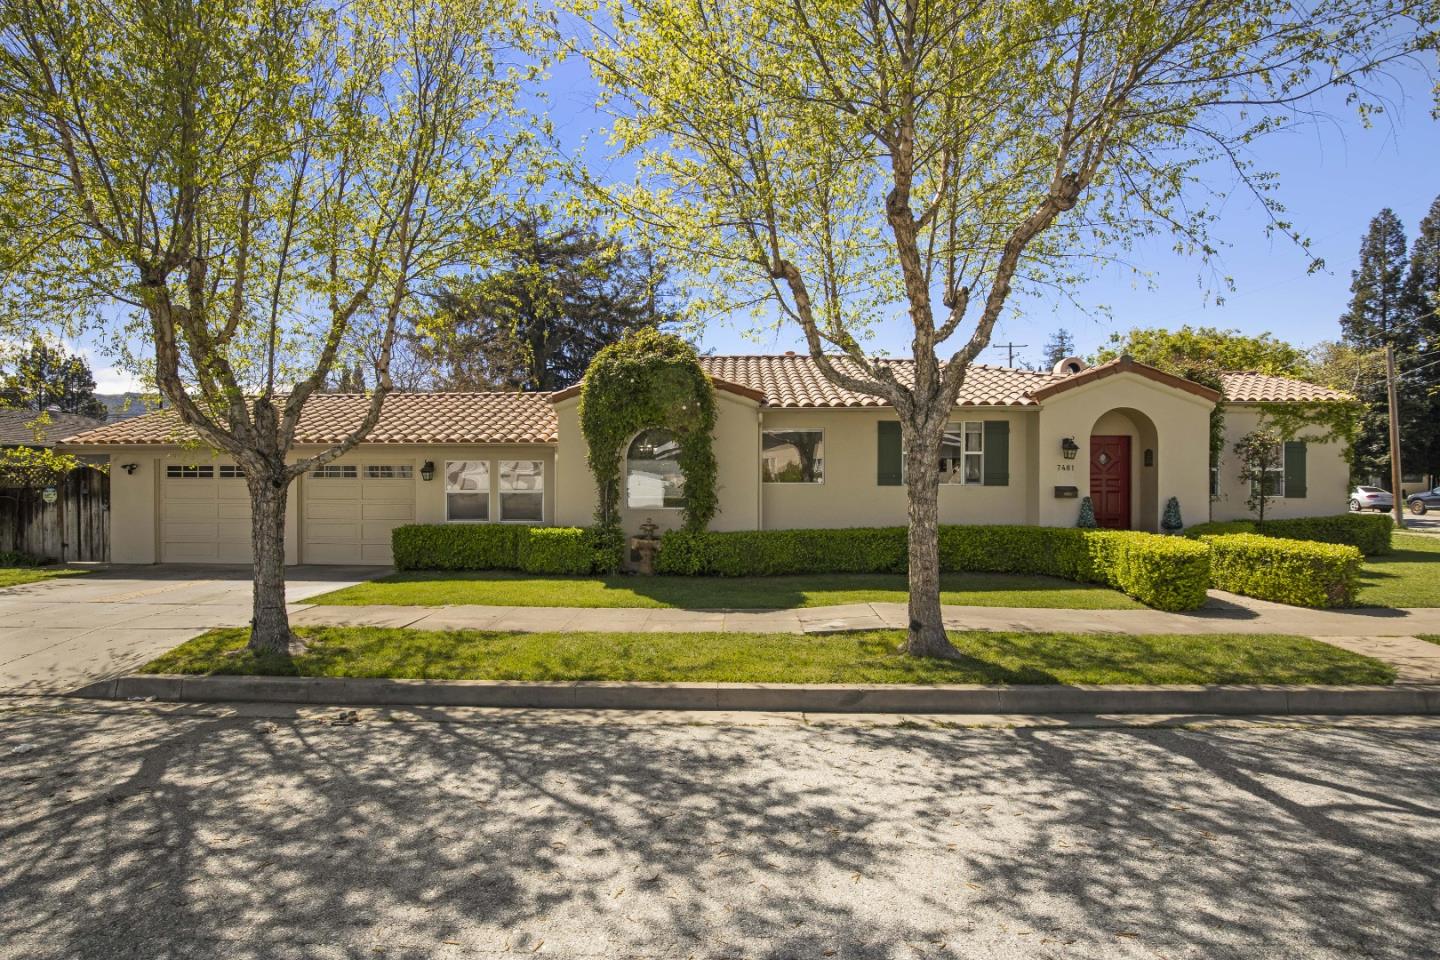 Photo of 7481 Dowdy St in Gilroy, CA